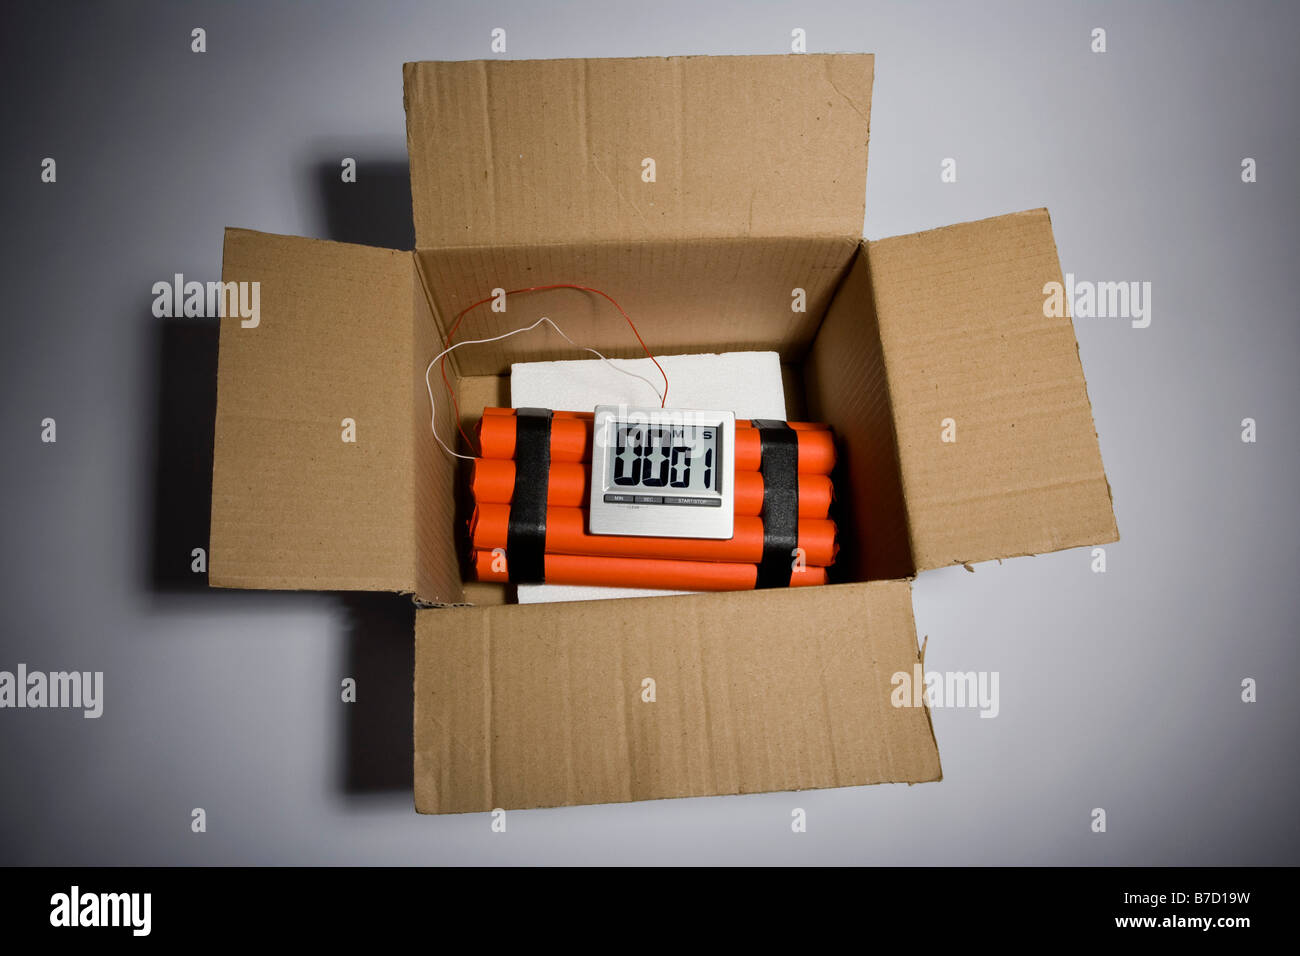 A dynamite time bomb in a cardboard box with 1 second left on the timer Stock Photo